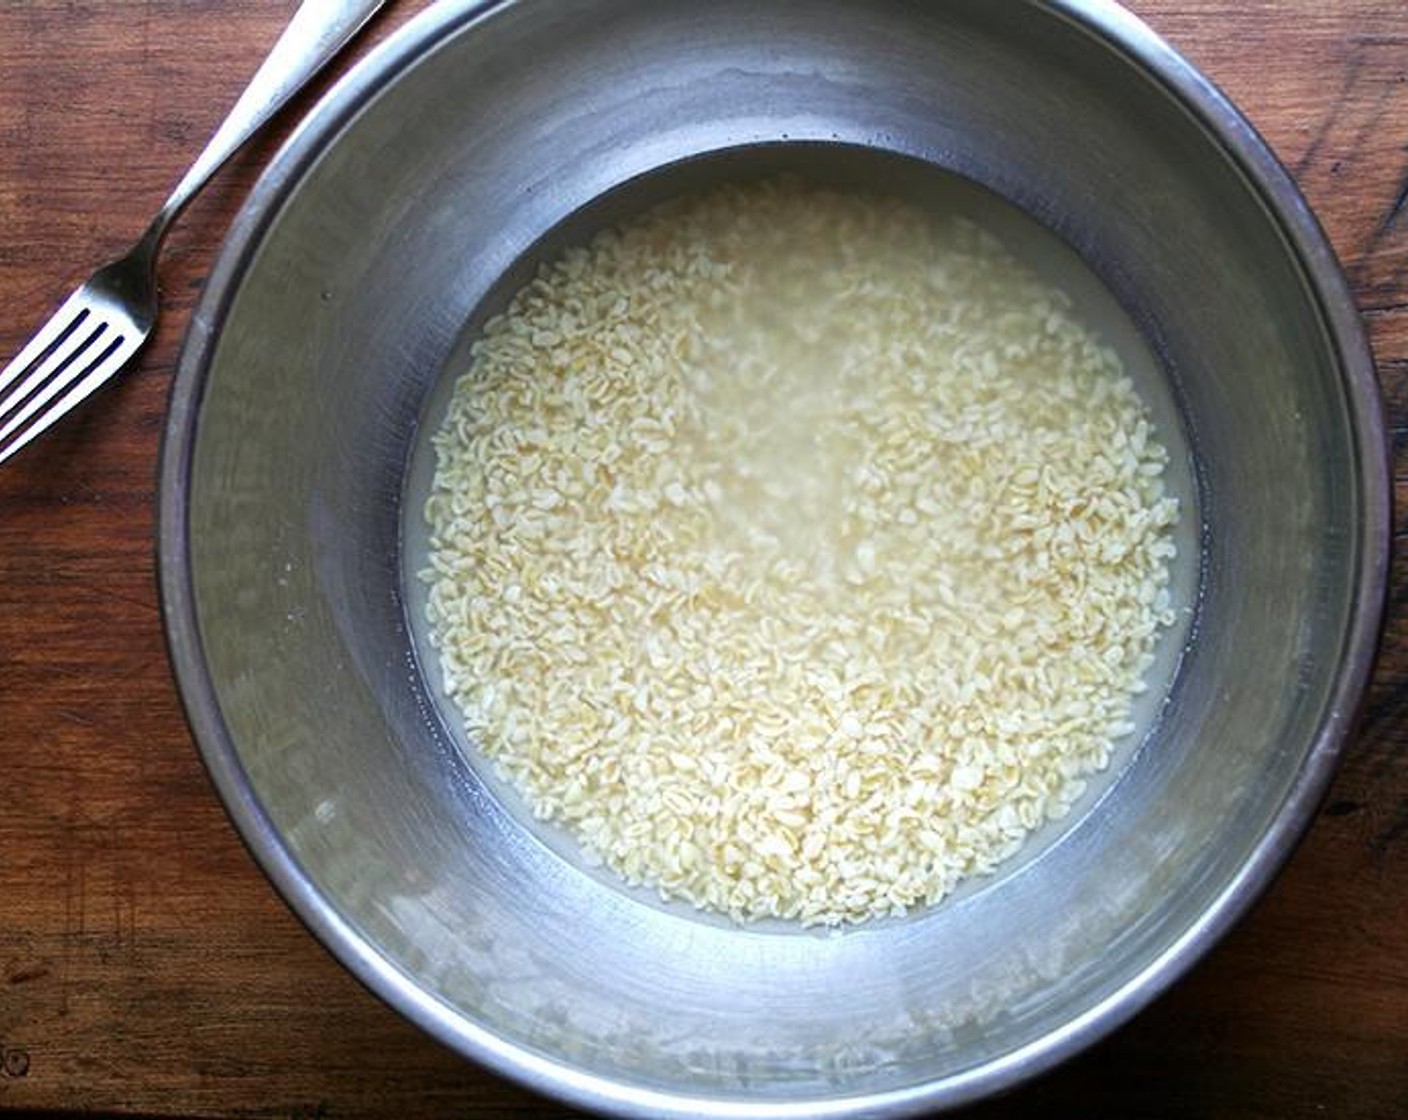 step 1 Place Bulgur Wheat (1 cup) in a large bowl. Cover with cold water. Let stand for one hour. Drain in a fine-mesh sieve or use a pot cover to hold back the bulgur while you drain the water into the sink. Set aside.